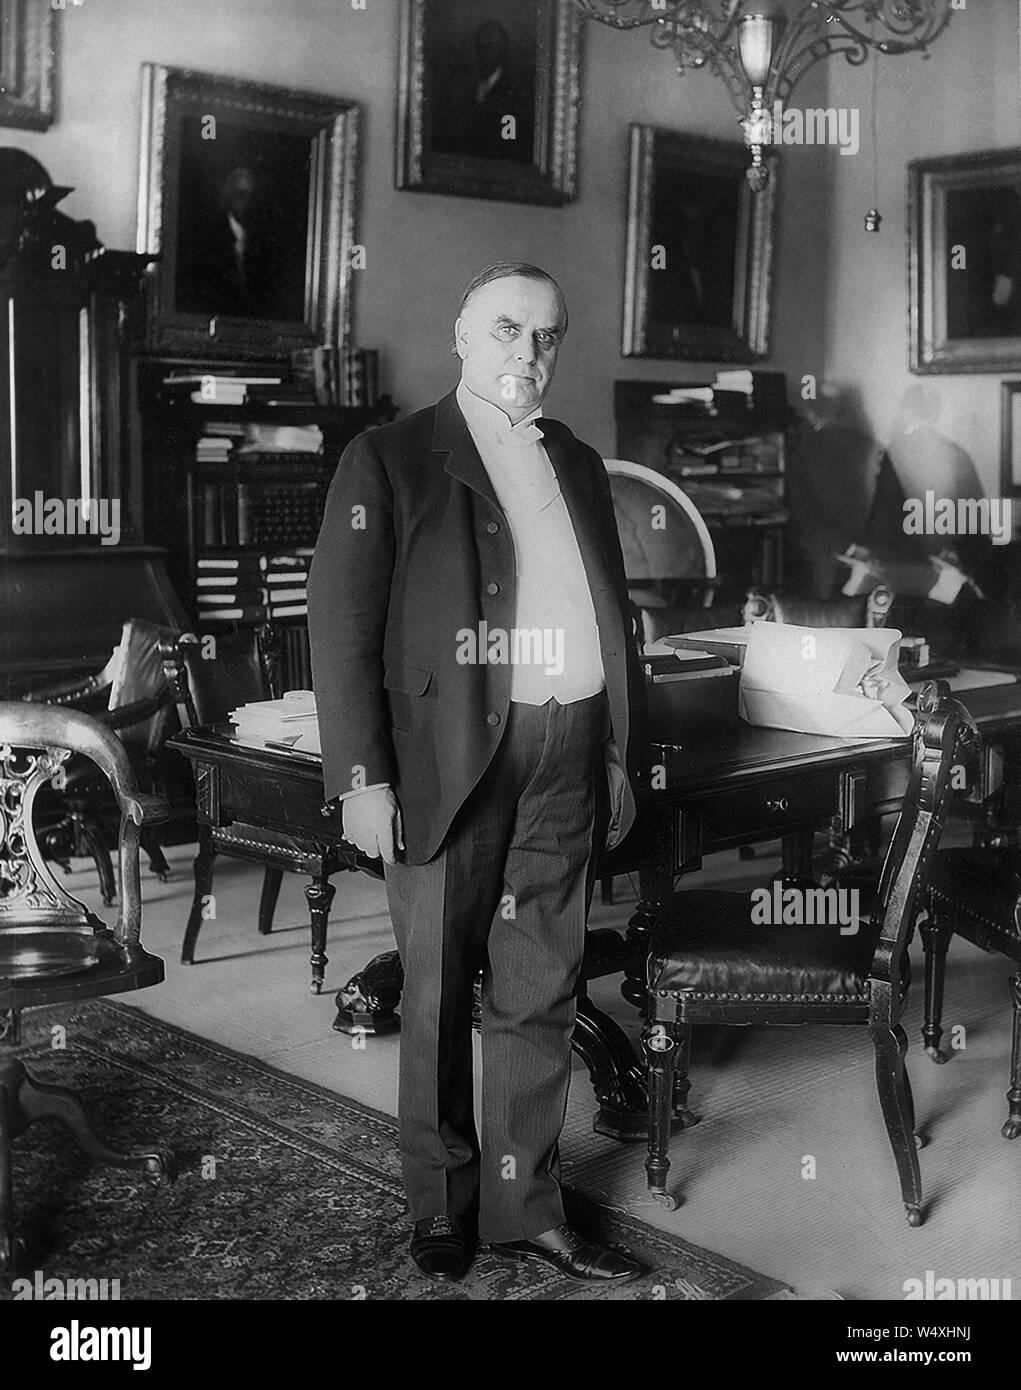 William McKinley (1843-1901), 25th President of the United States 1897-1901, Full-Length Portrait, Photograph by Francis Benjamin Johnston, 1898 Stock Photo